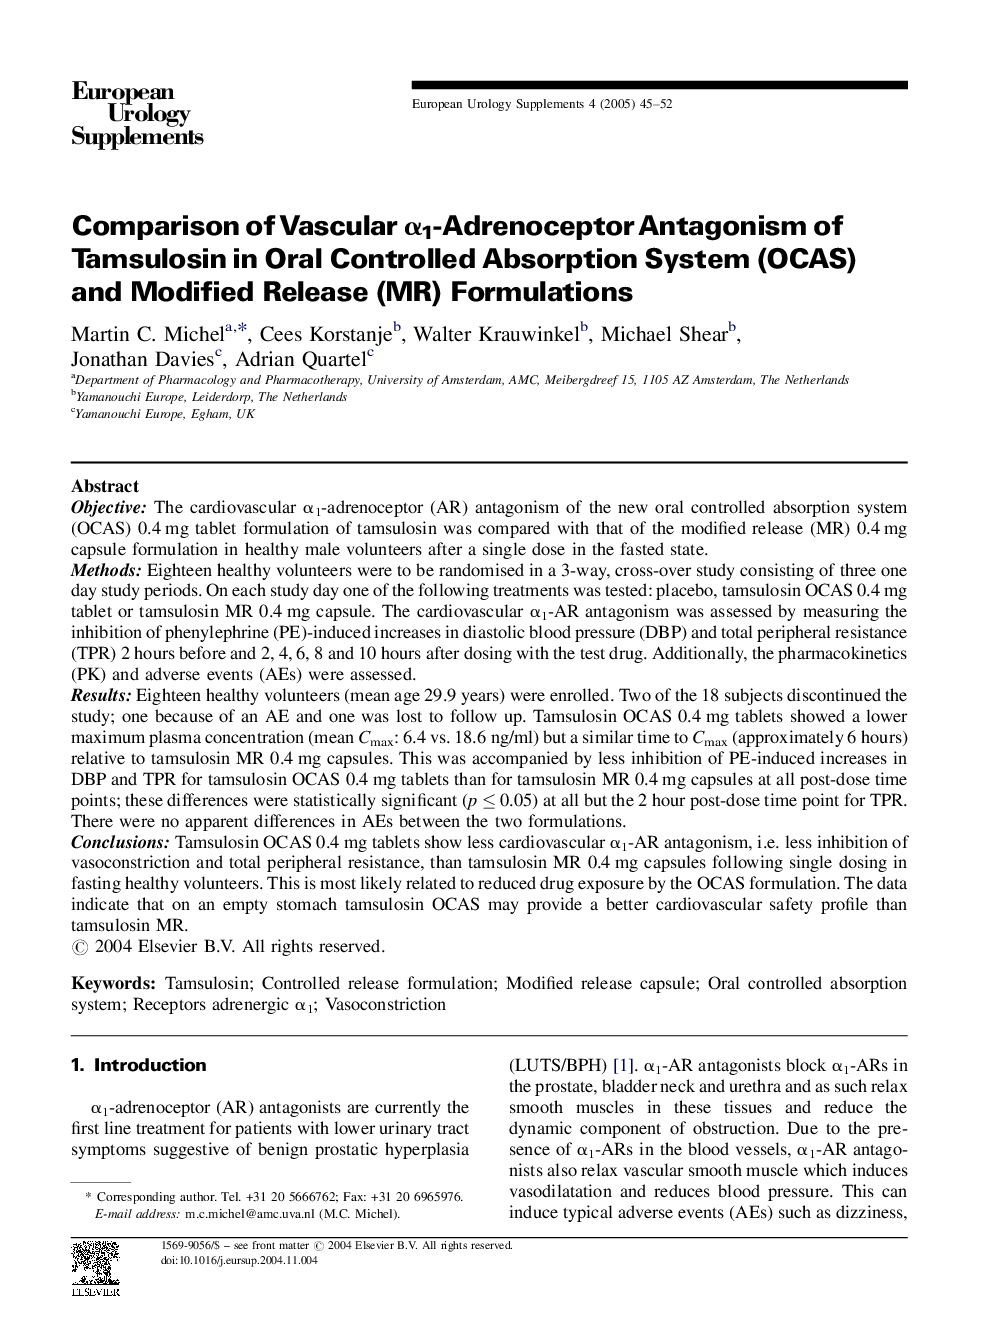 Comparison of Vascular Î±1-Adrenoceptor Antagonism of Tamsulosin in Oral Controlled Absorption System (OCAS) and Modified Release (MR) Formulations